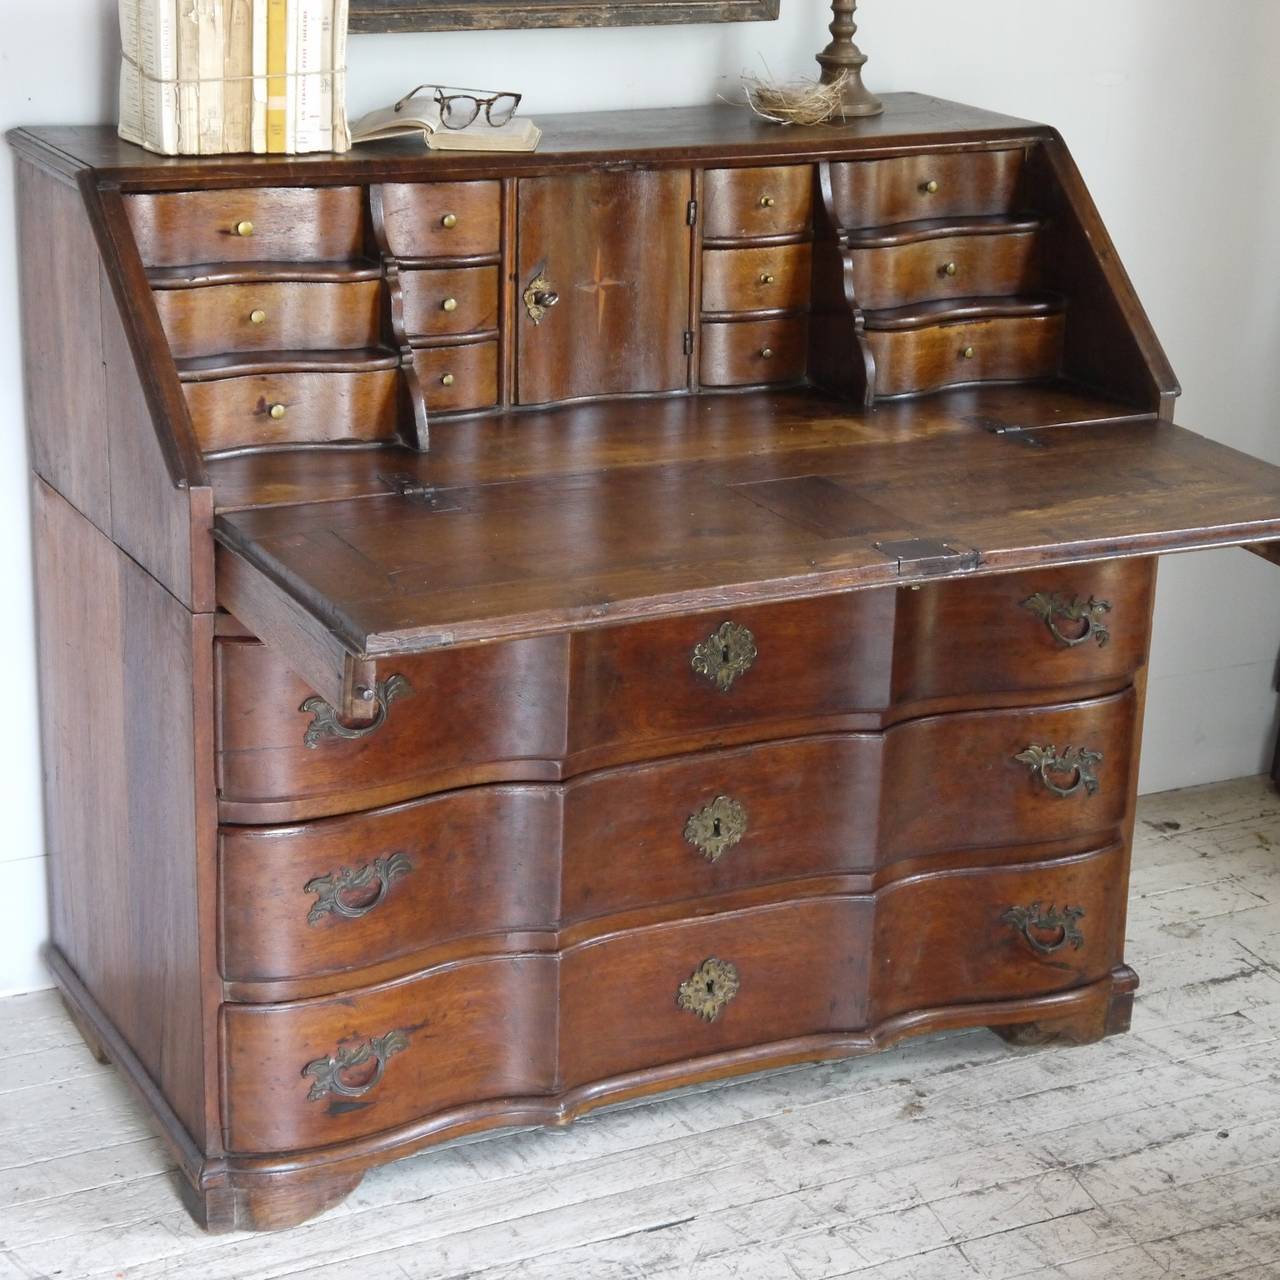 19th century French oak secretaire with three large serpentine drawers and a fitted interior containing six graduated drawers, six petite drawers and a small central cabinet all with rich color and patination and original hardware. Great storage and